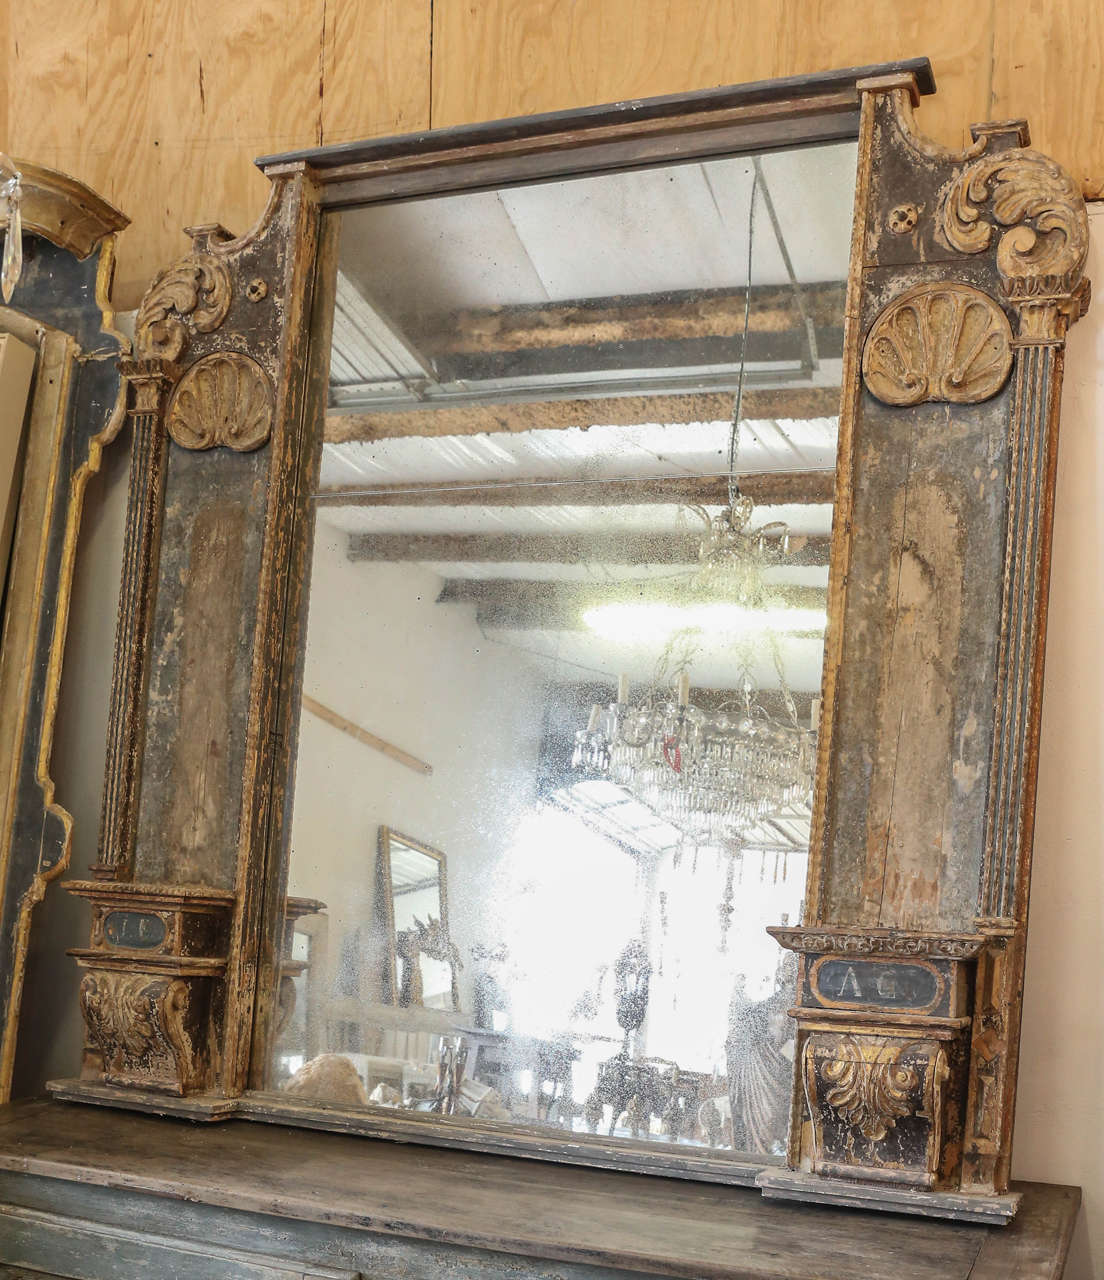 This grandiose Spanish 17th century mirror was made up from Altar Fragments. Beautiful deep blue, gold, and white painted detailing and exquisite carving make this piece so special.